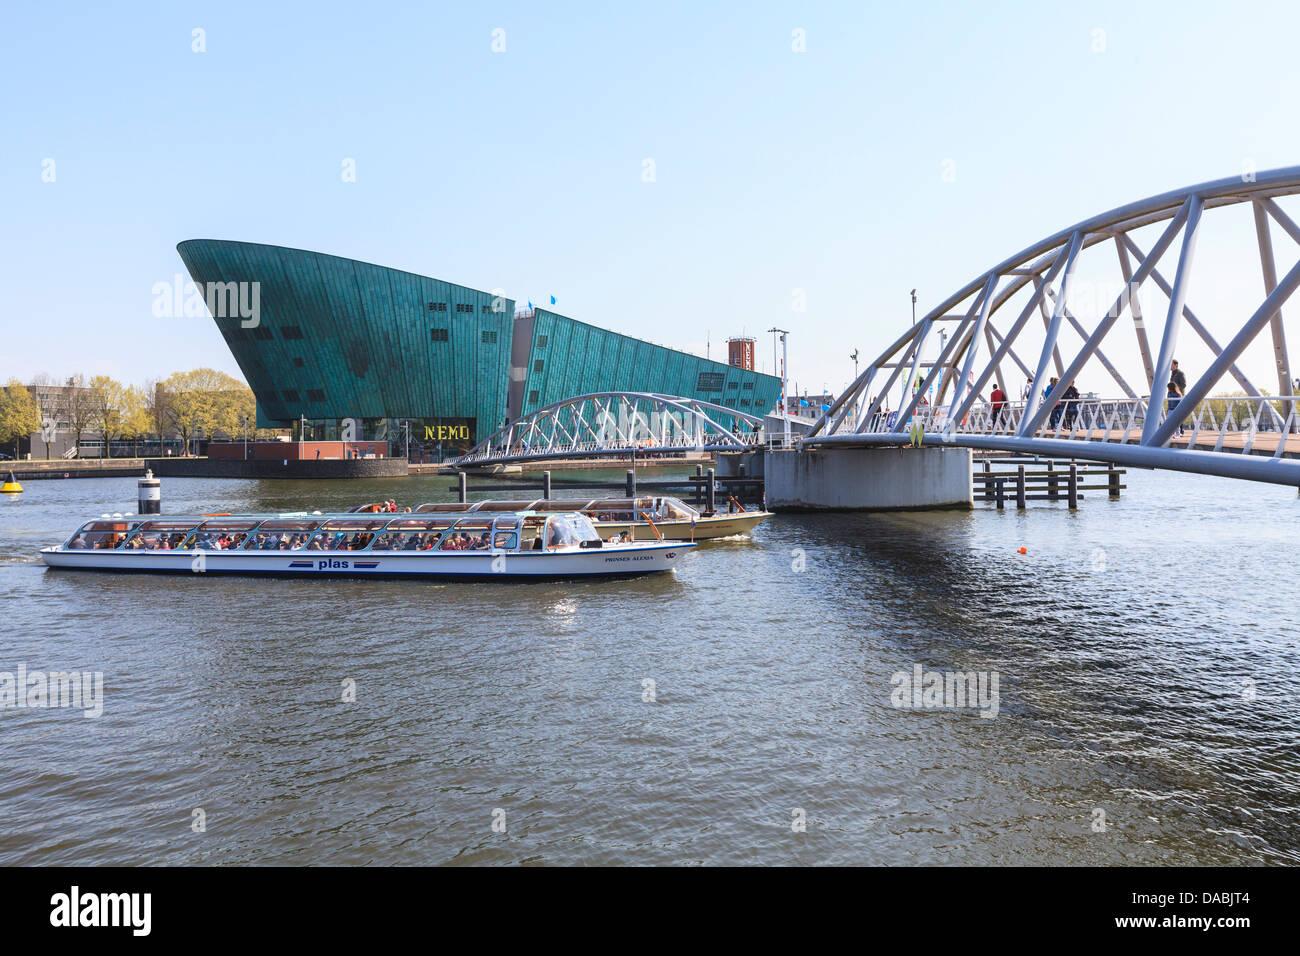 NEMO, science and technology museum, Eastern Docks, Amsterdam, Netherlands, Europe Stock Photo